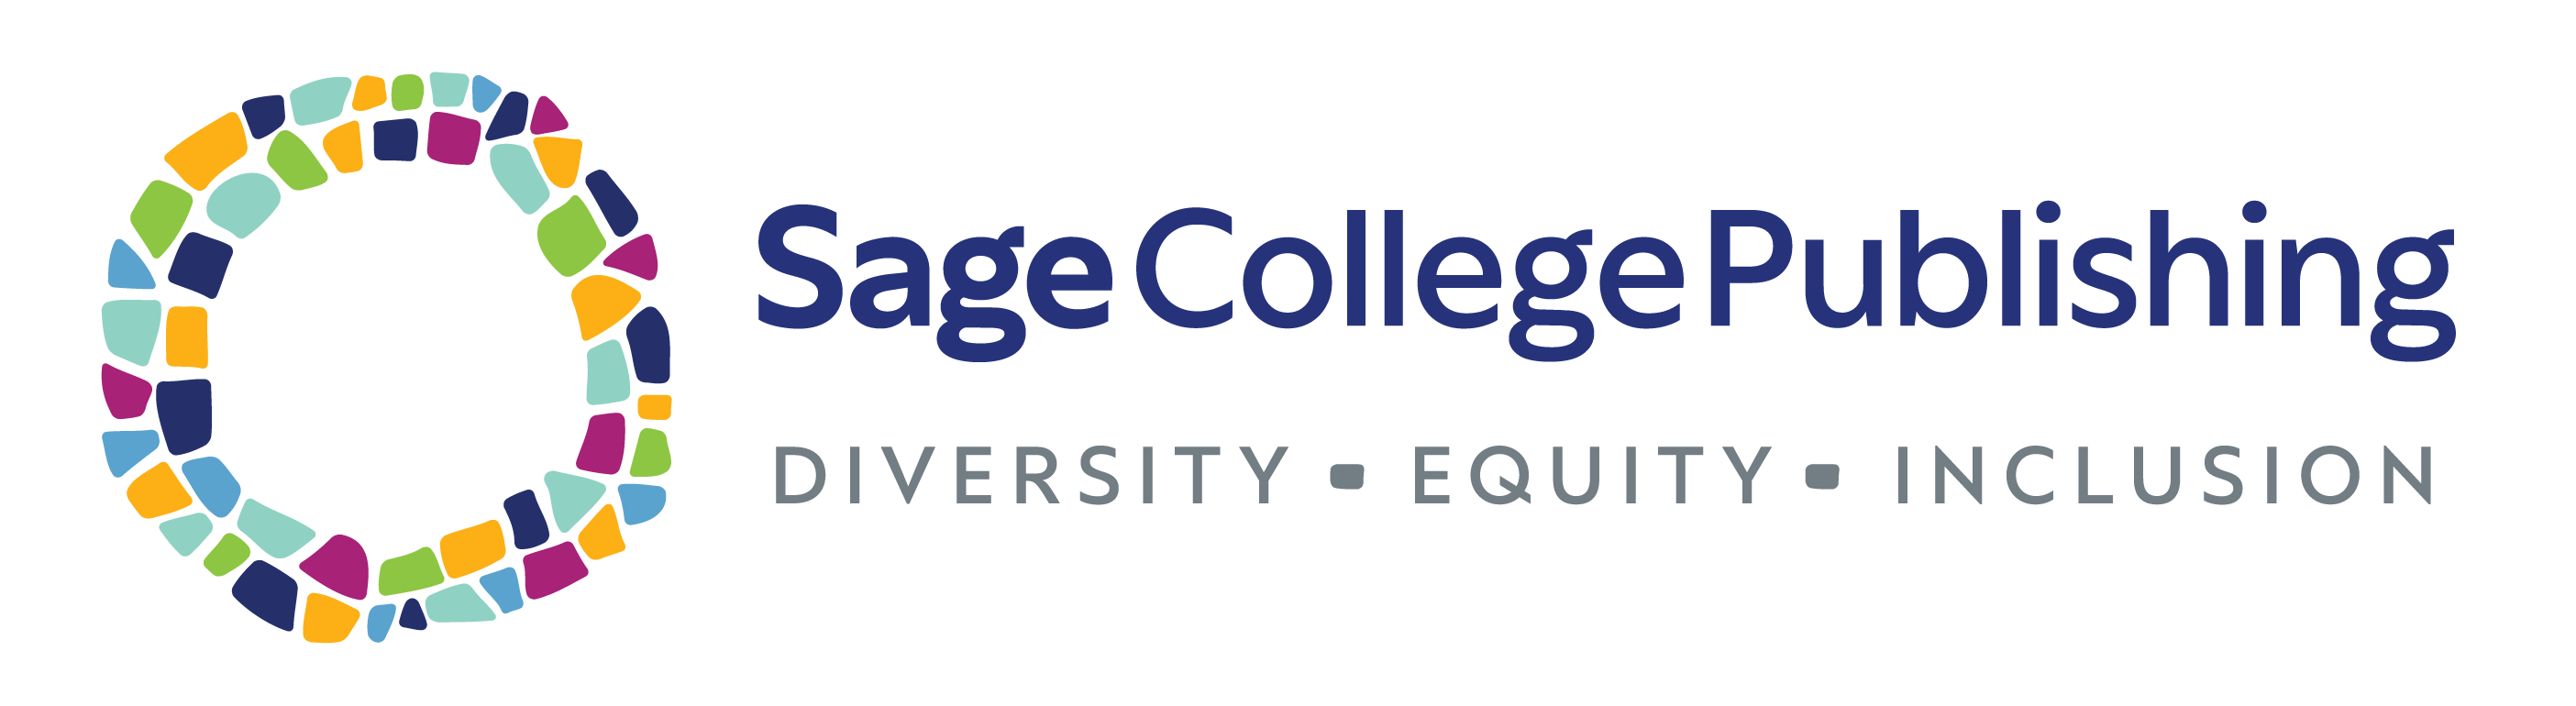 Sage College Publishing Diversity, Equity, and Inclusion Logo